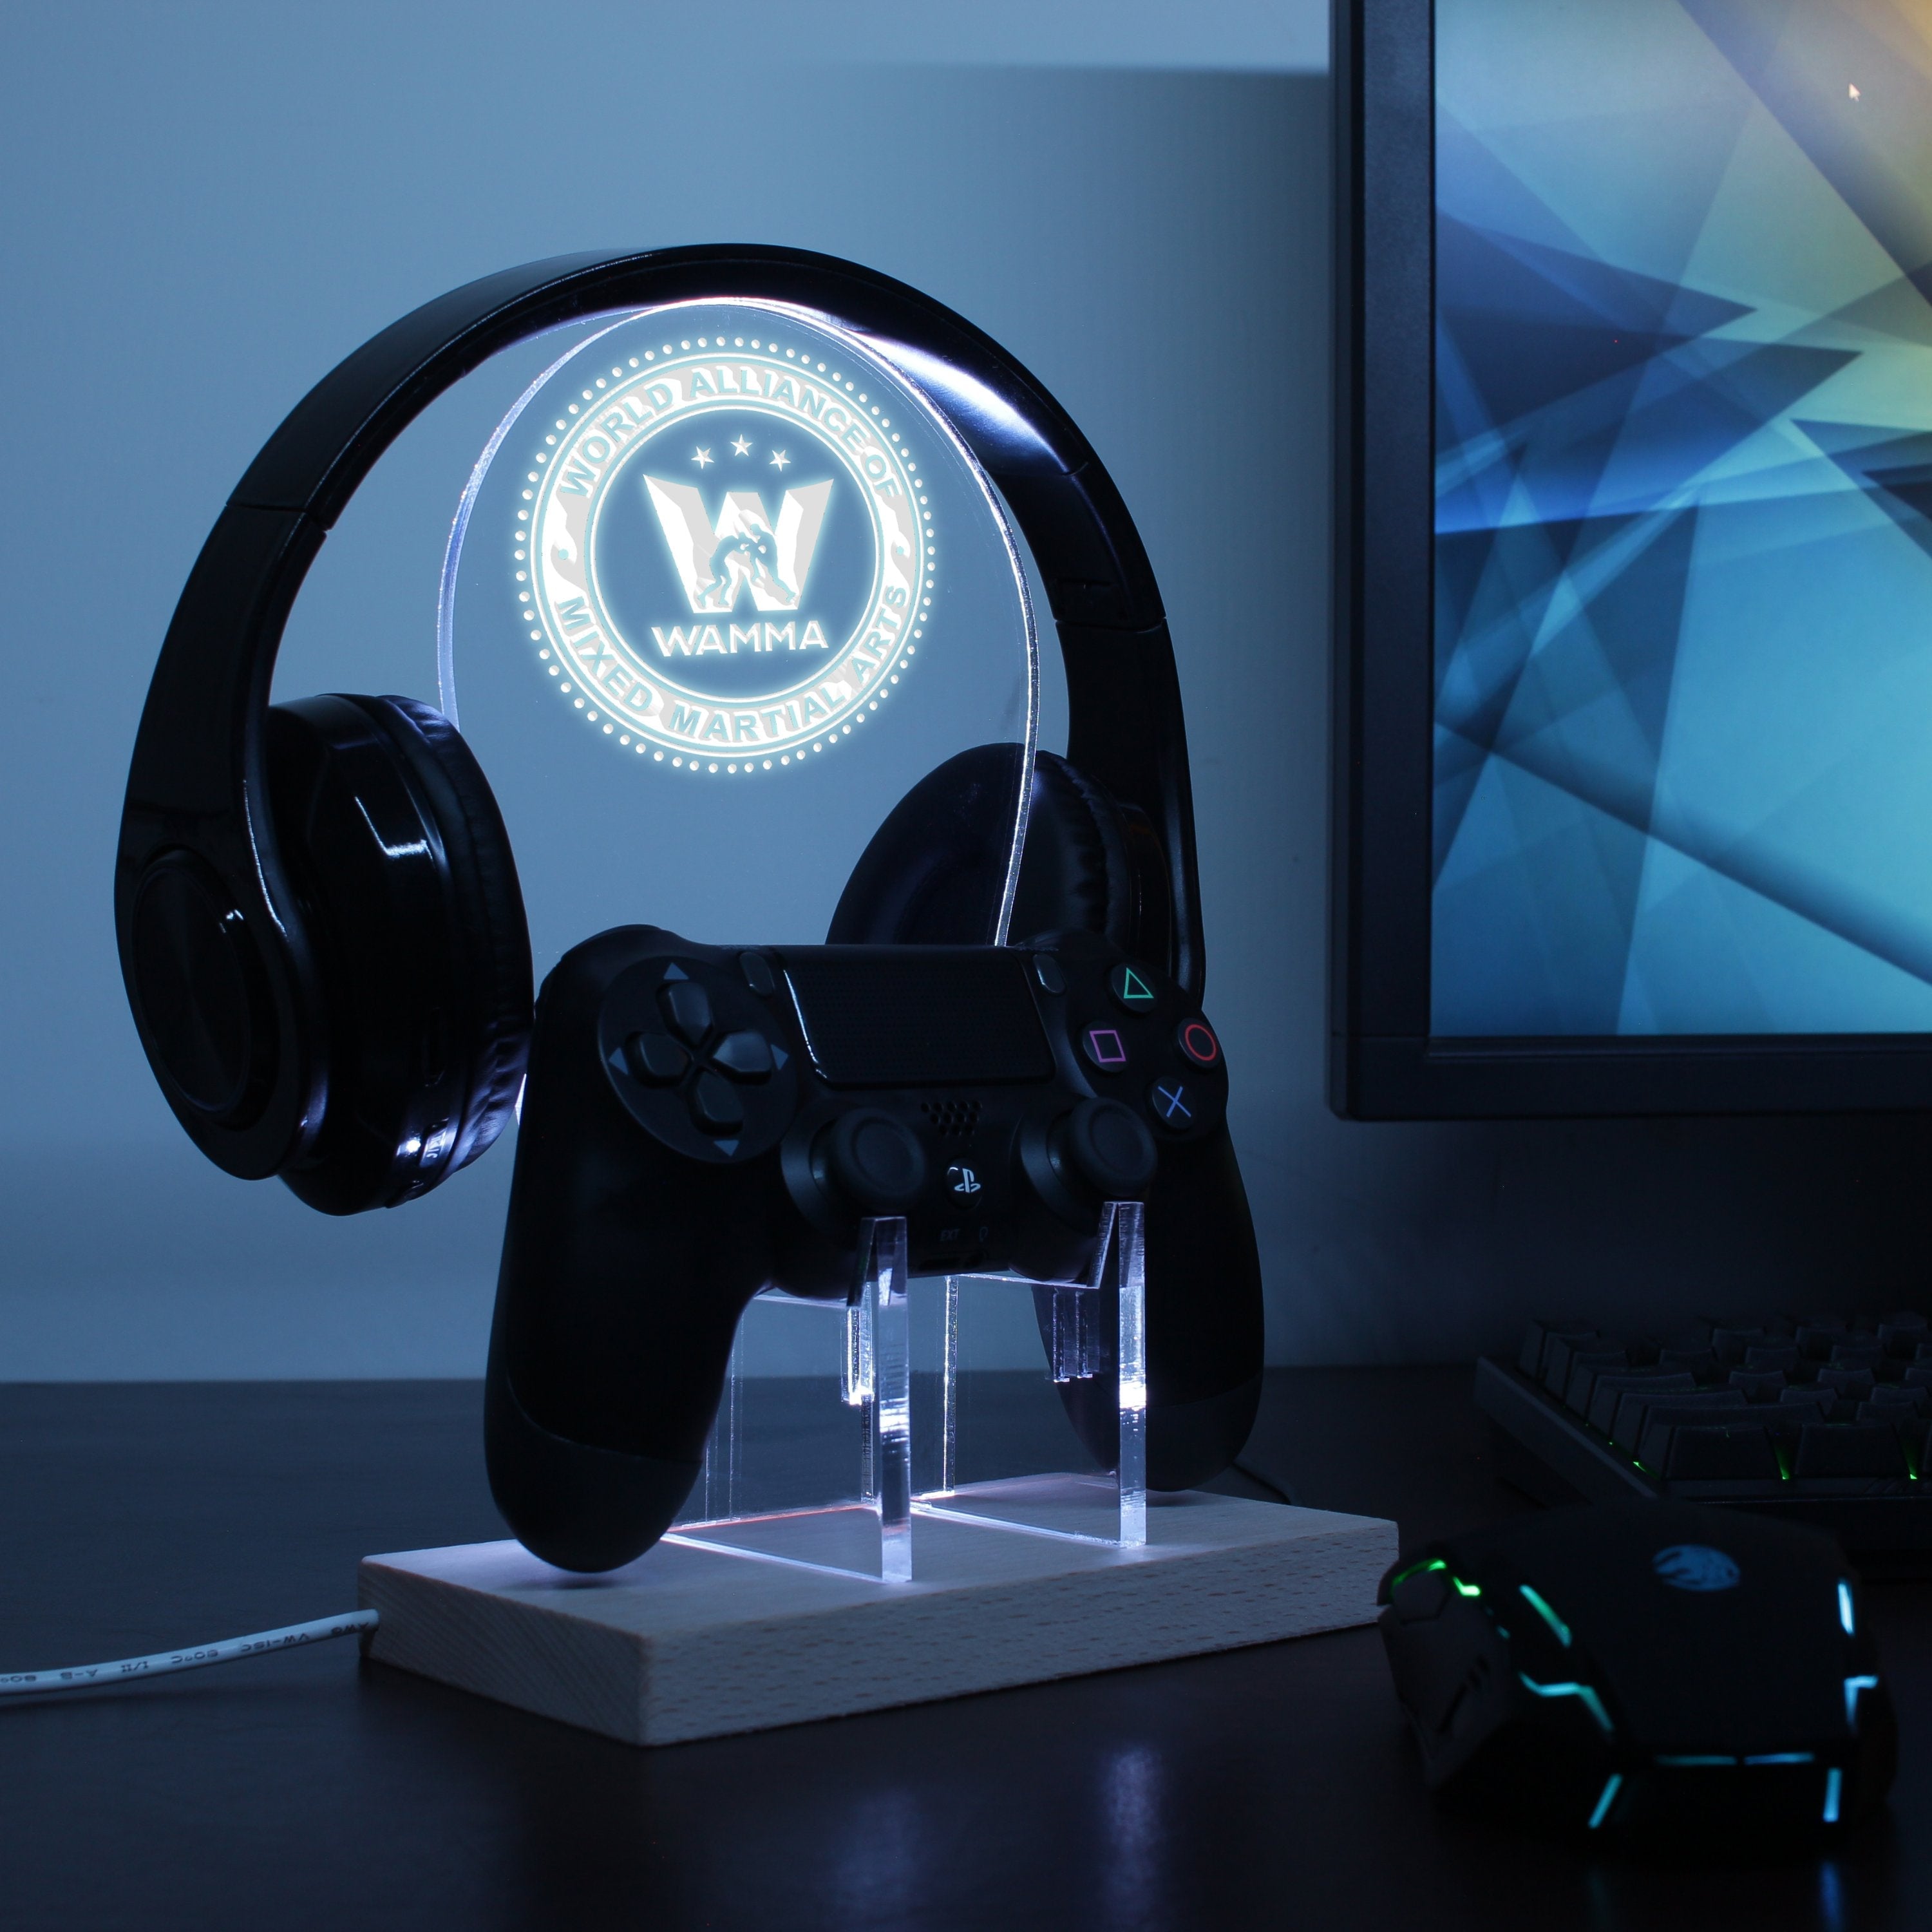 World Alliance of Mixed Martial Arts LED Gaming Headset Controller Stand